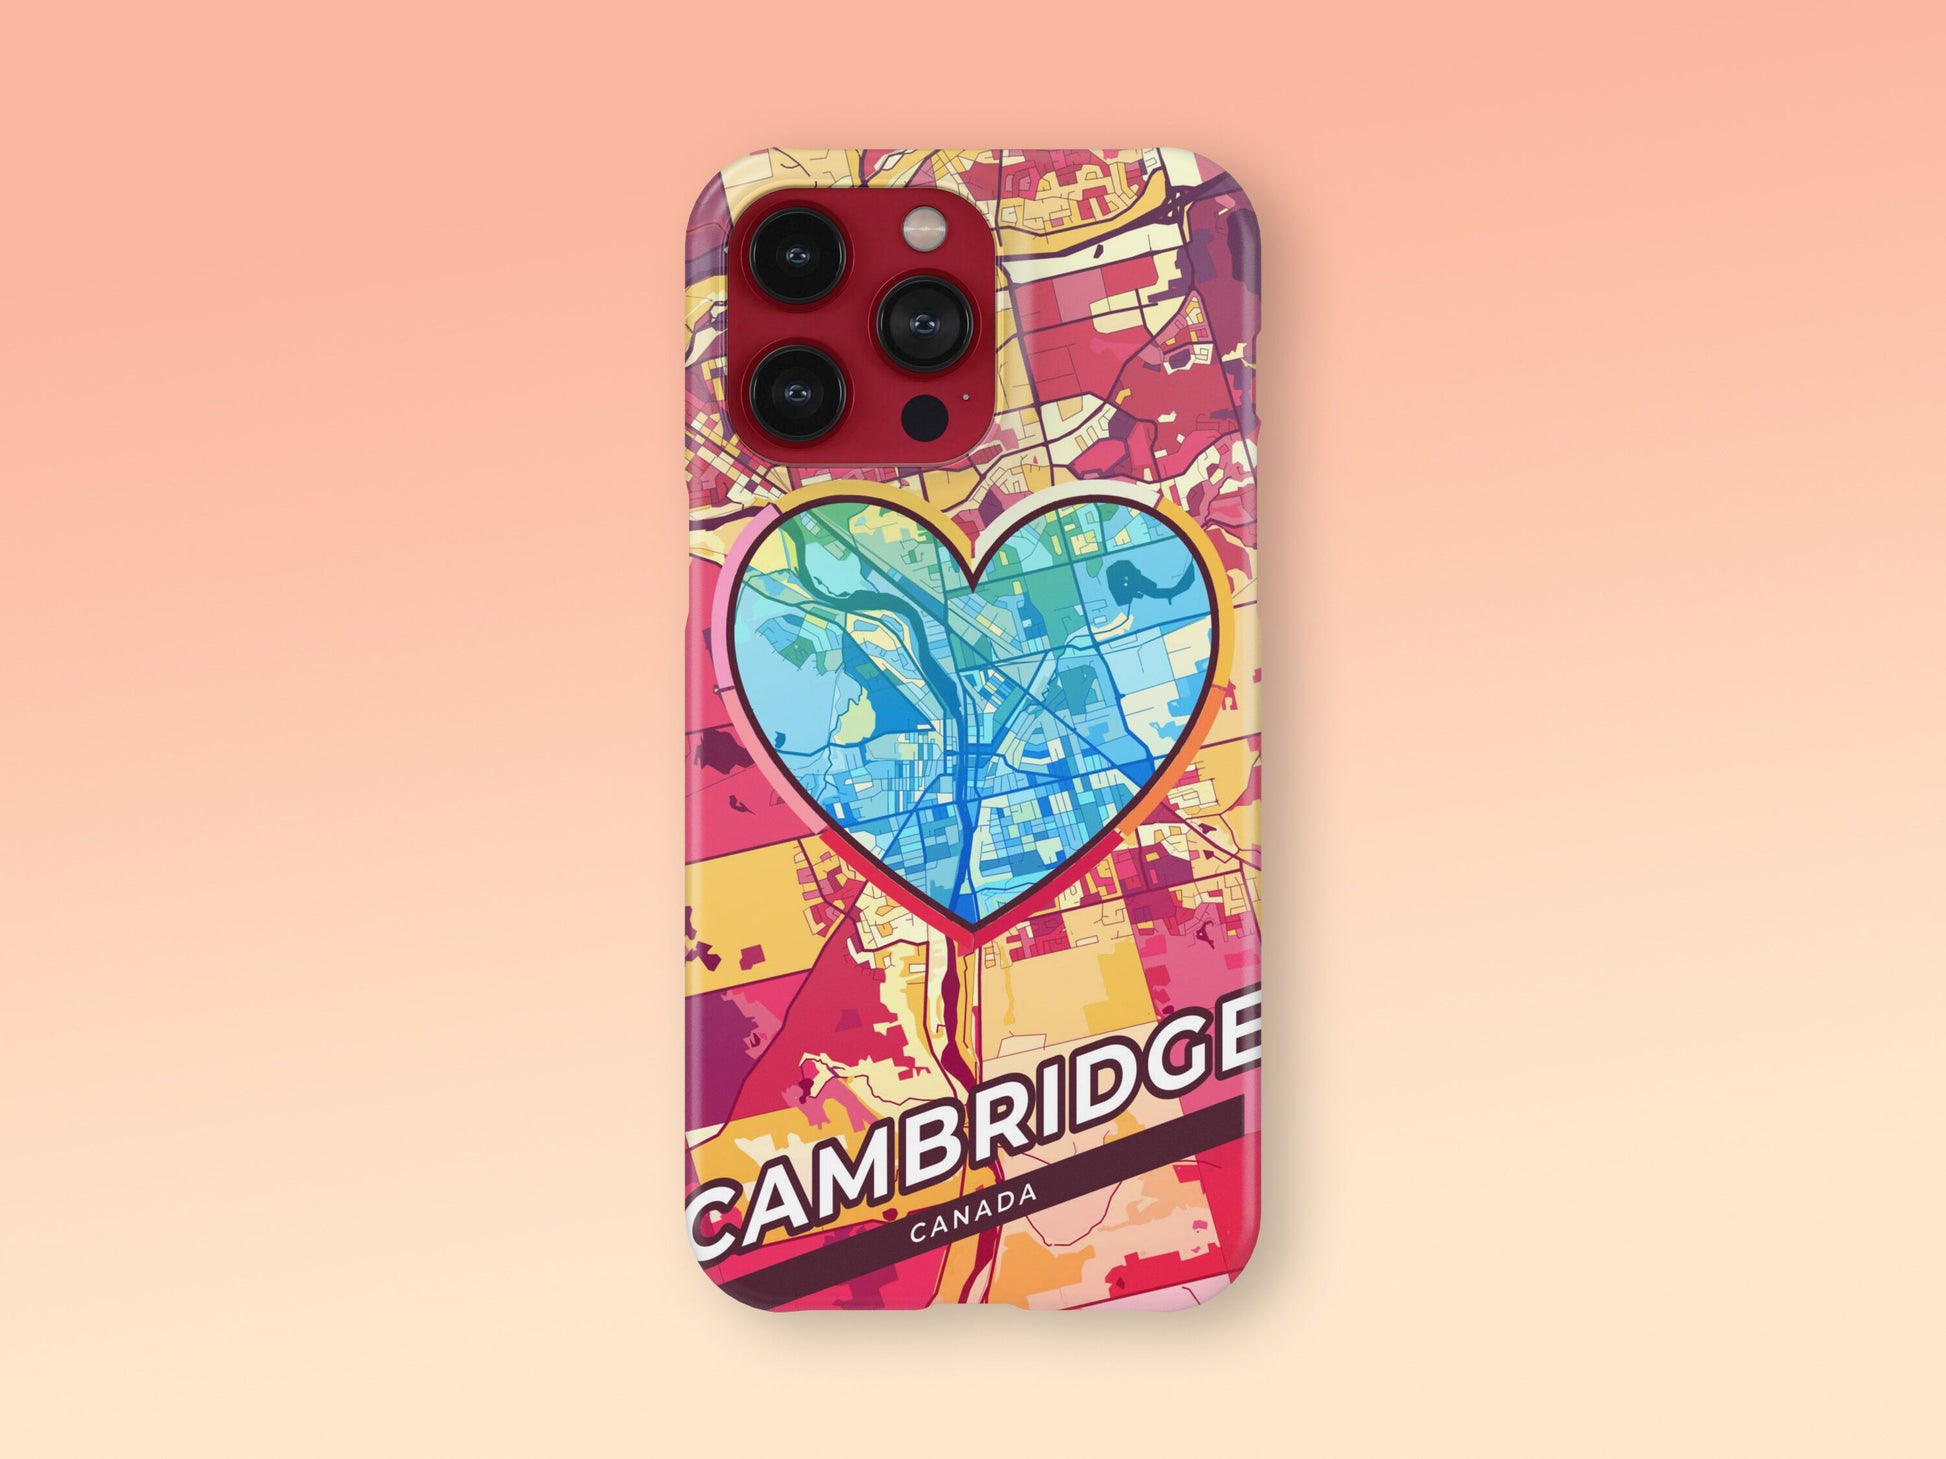 Cambridge Canada slim phone case with colorful icon. Birthday, wedding or housewarming gift. Couple match cases. 2